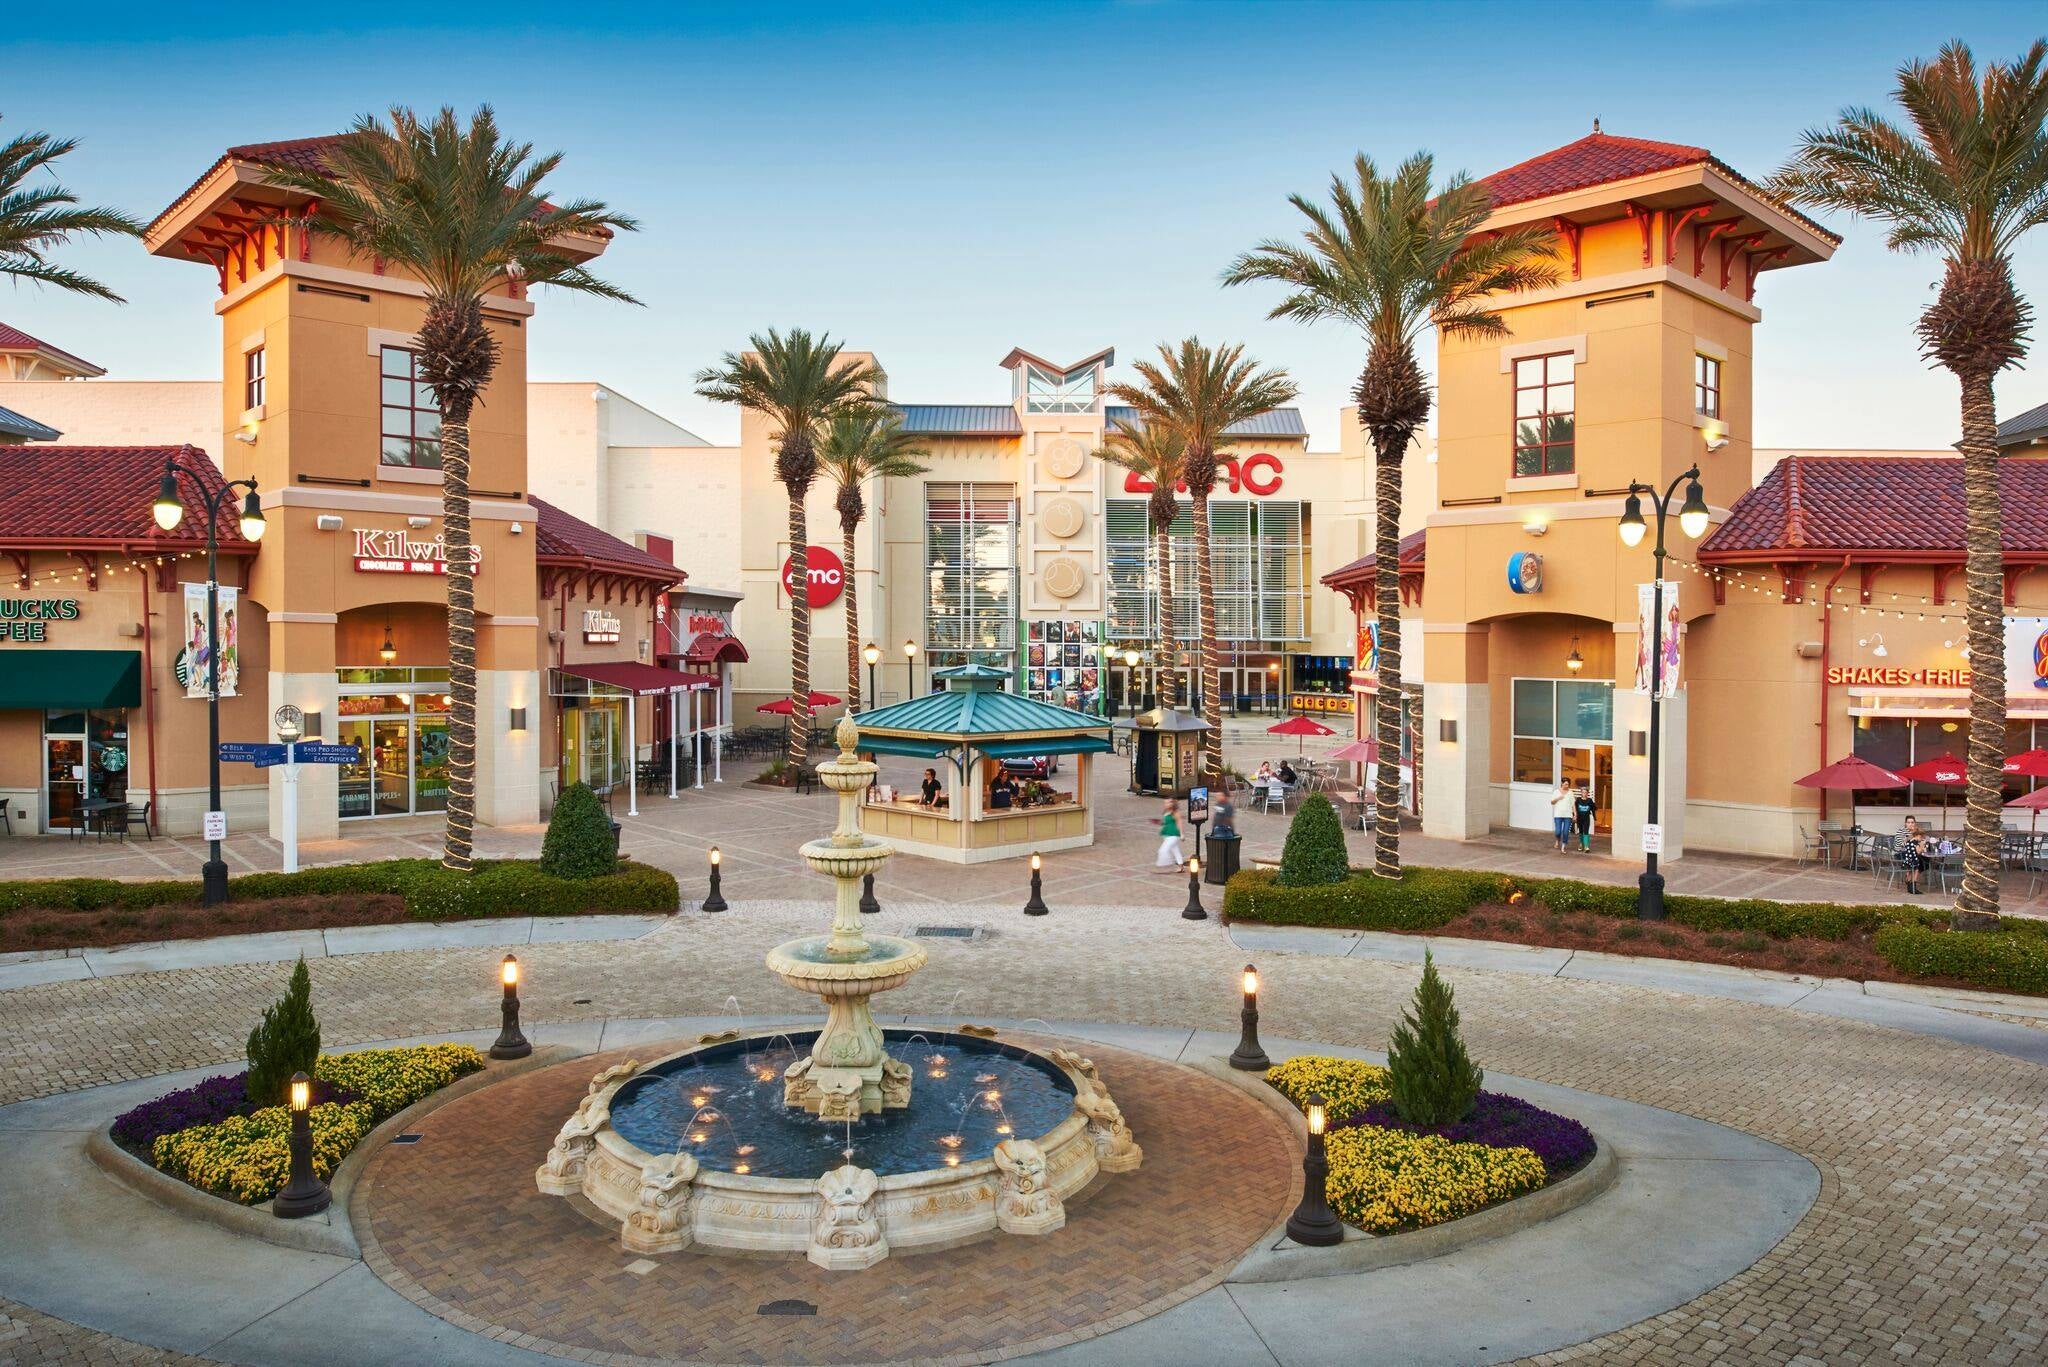 Destin Commons nearby